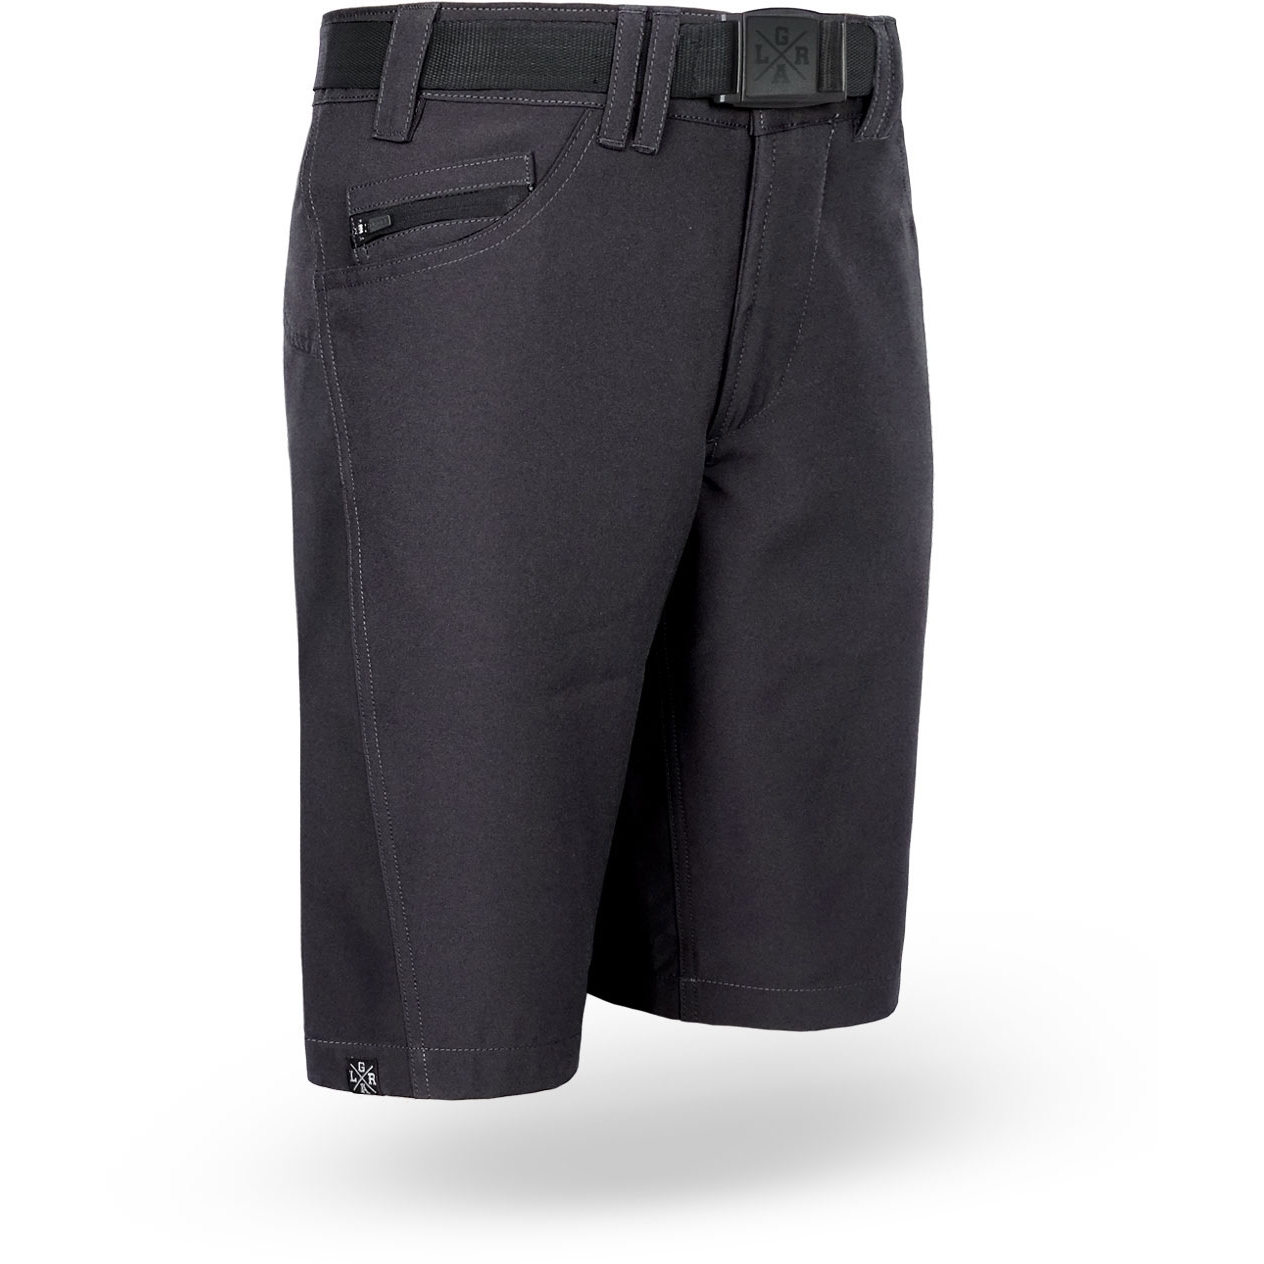 Productfoto van Loose Riders Sessions Technical Shorts - Black